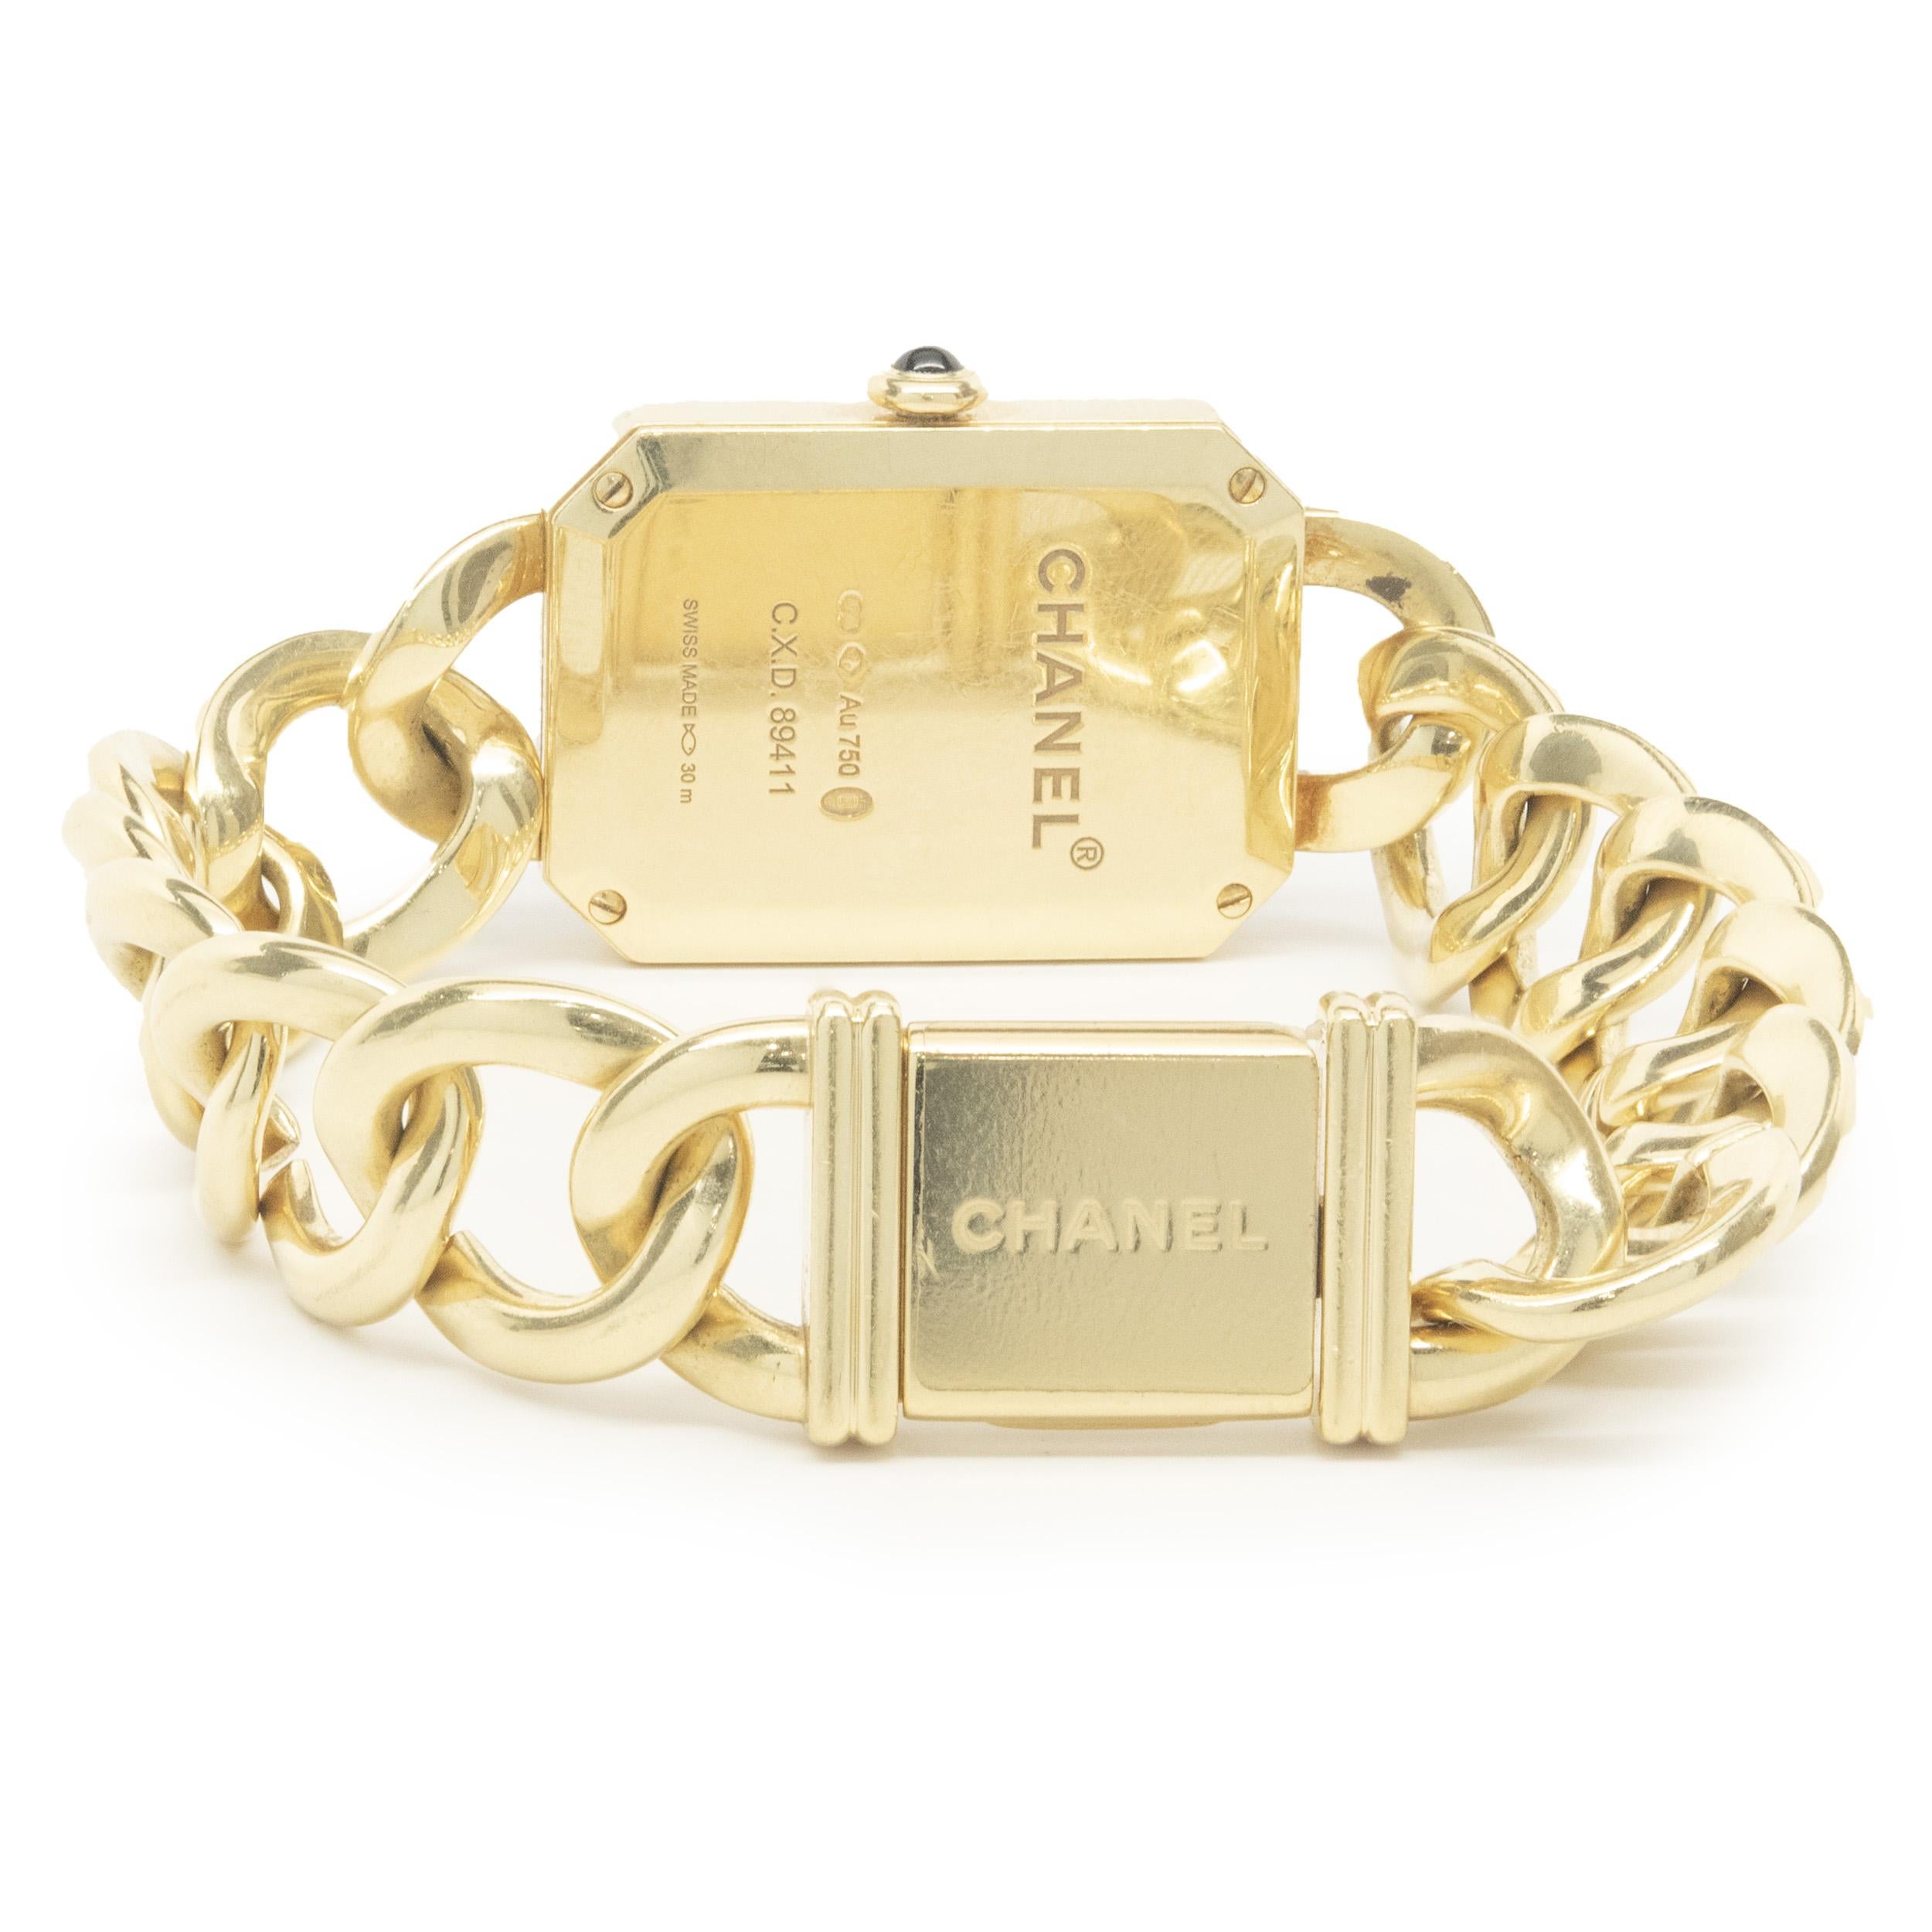 Movement: quartz
Function: hours, minutes 
Case: 28 x 20mm 18K yellow gold case, diamond bezel, sapphire crystal, push-pull crown
Band: 18K yellow gold chain bracelet, integrated clasp
Dial: black
Reference #: H3260
Serial #: CXD89XXX

No box or